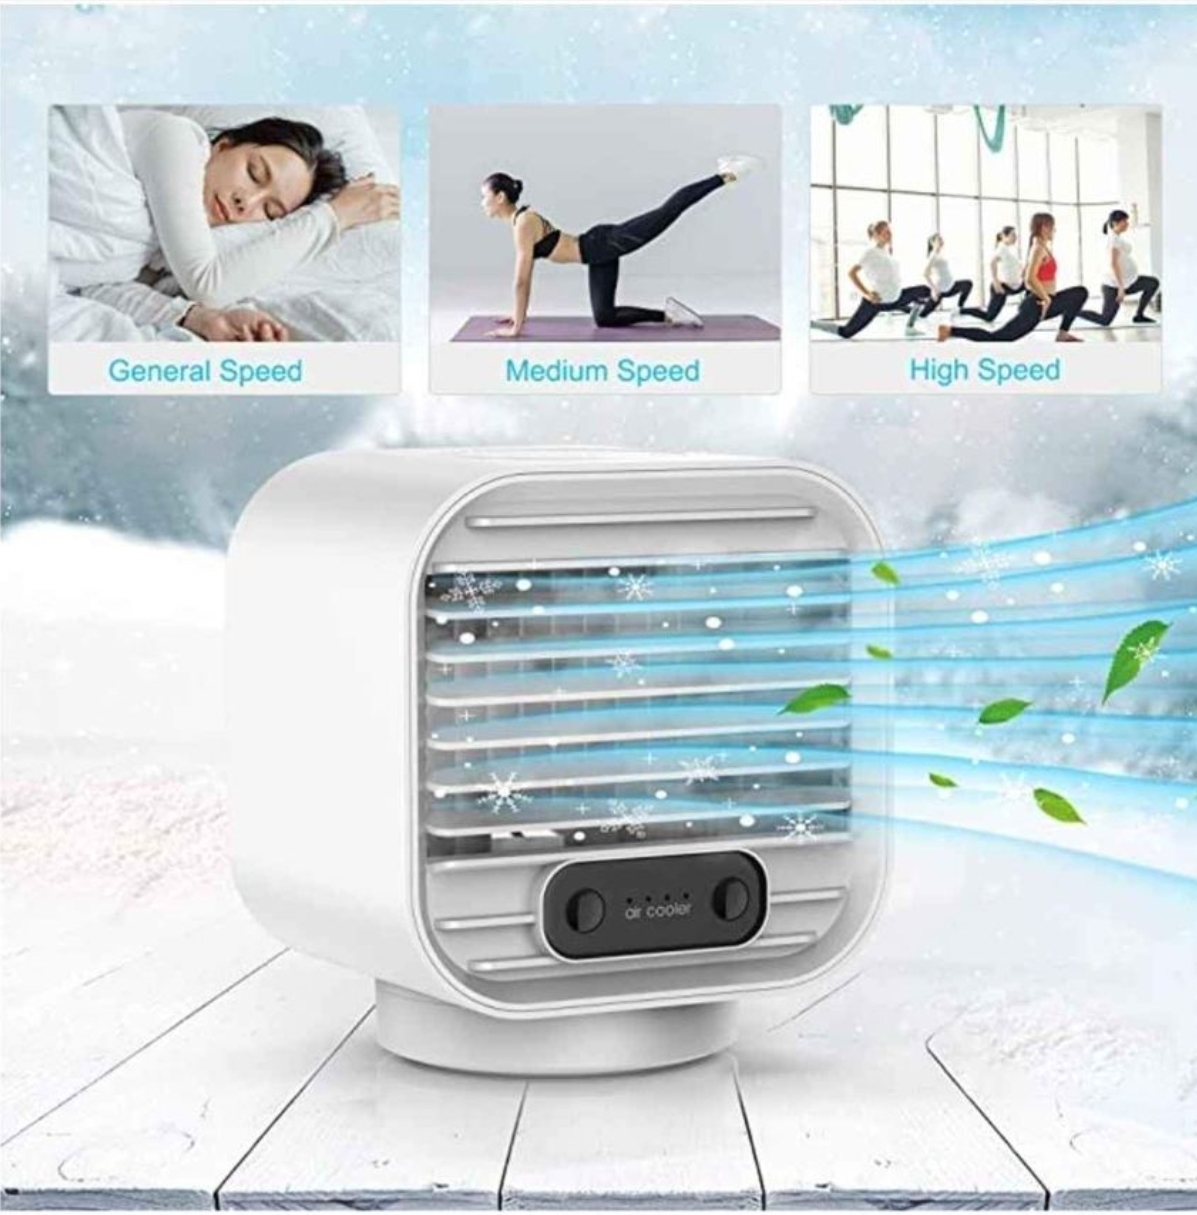 Air Cooler; Mini AC Portable Air Conditioner: Rechargeable 2000mAh Evaporative Cooling Fan with 3 Speeds,100% Leakproof Design for Home, Garden, Office, Car, Camping Tent etc.